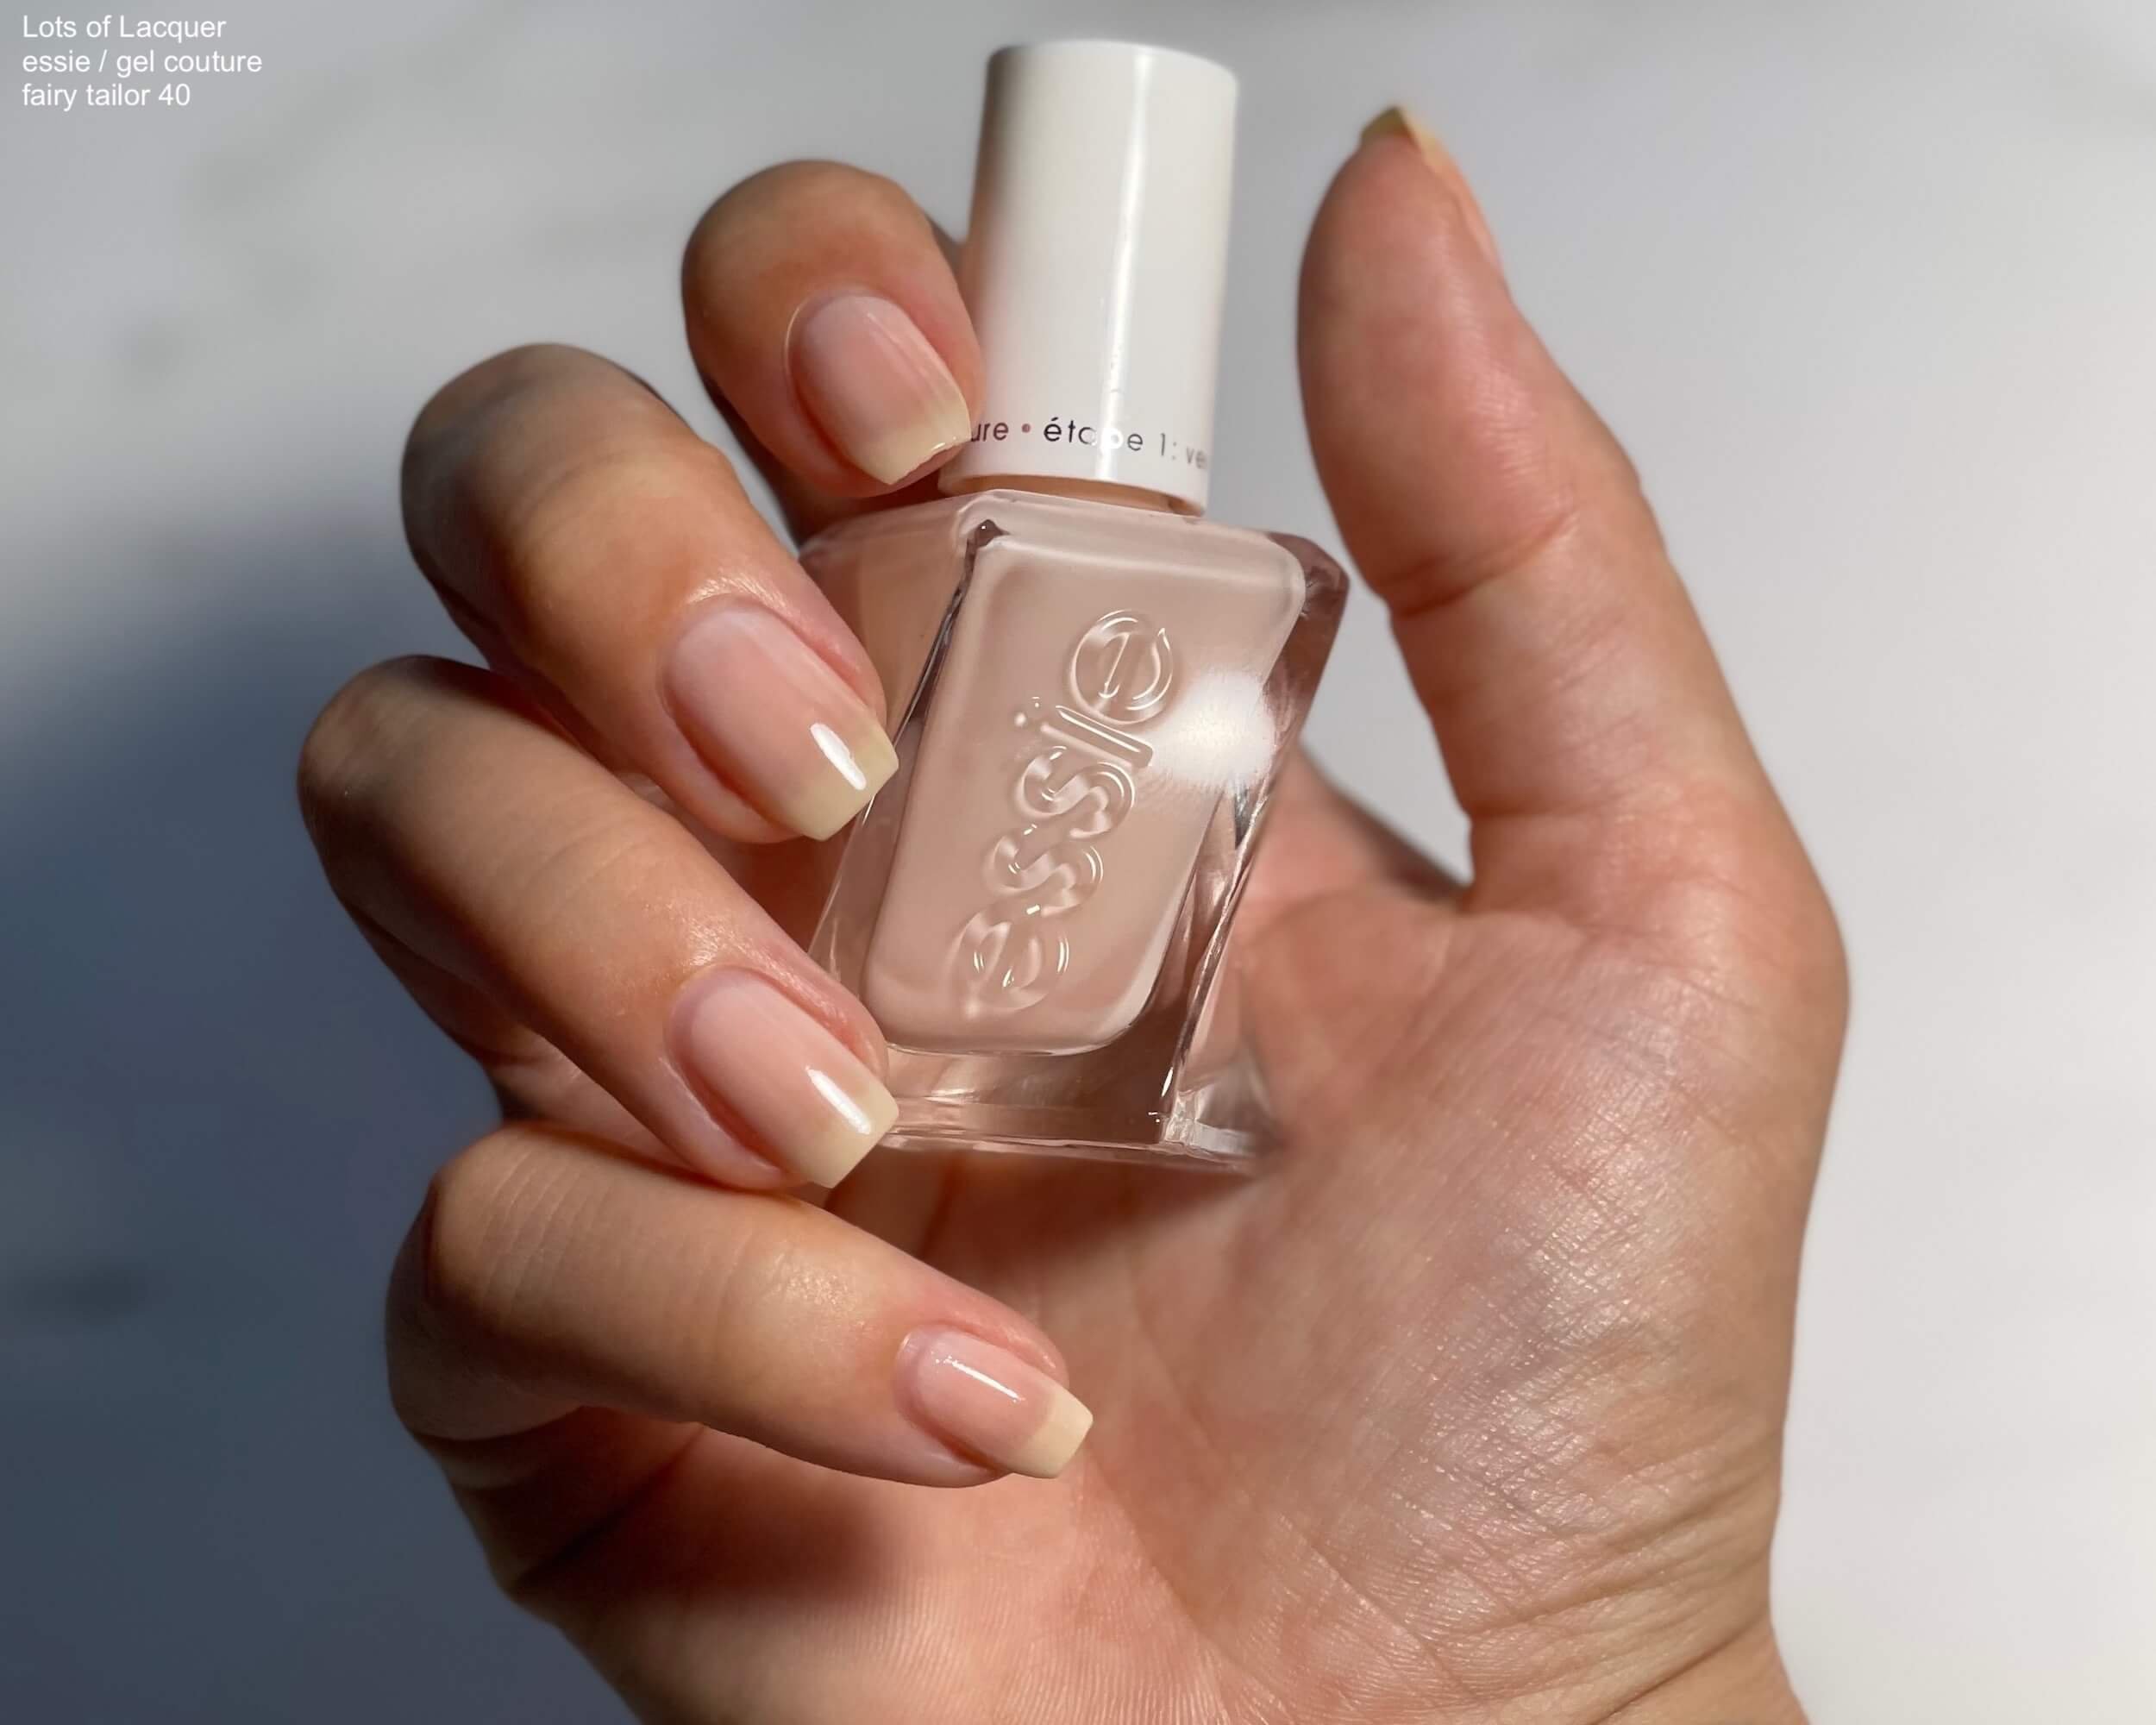 2. "Essie Gel Couture in Fairy Tailor" - wide 5